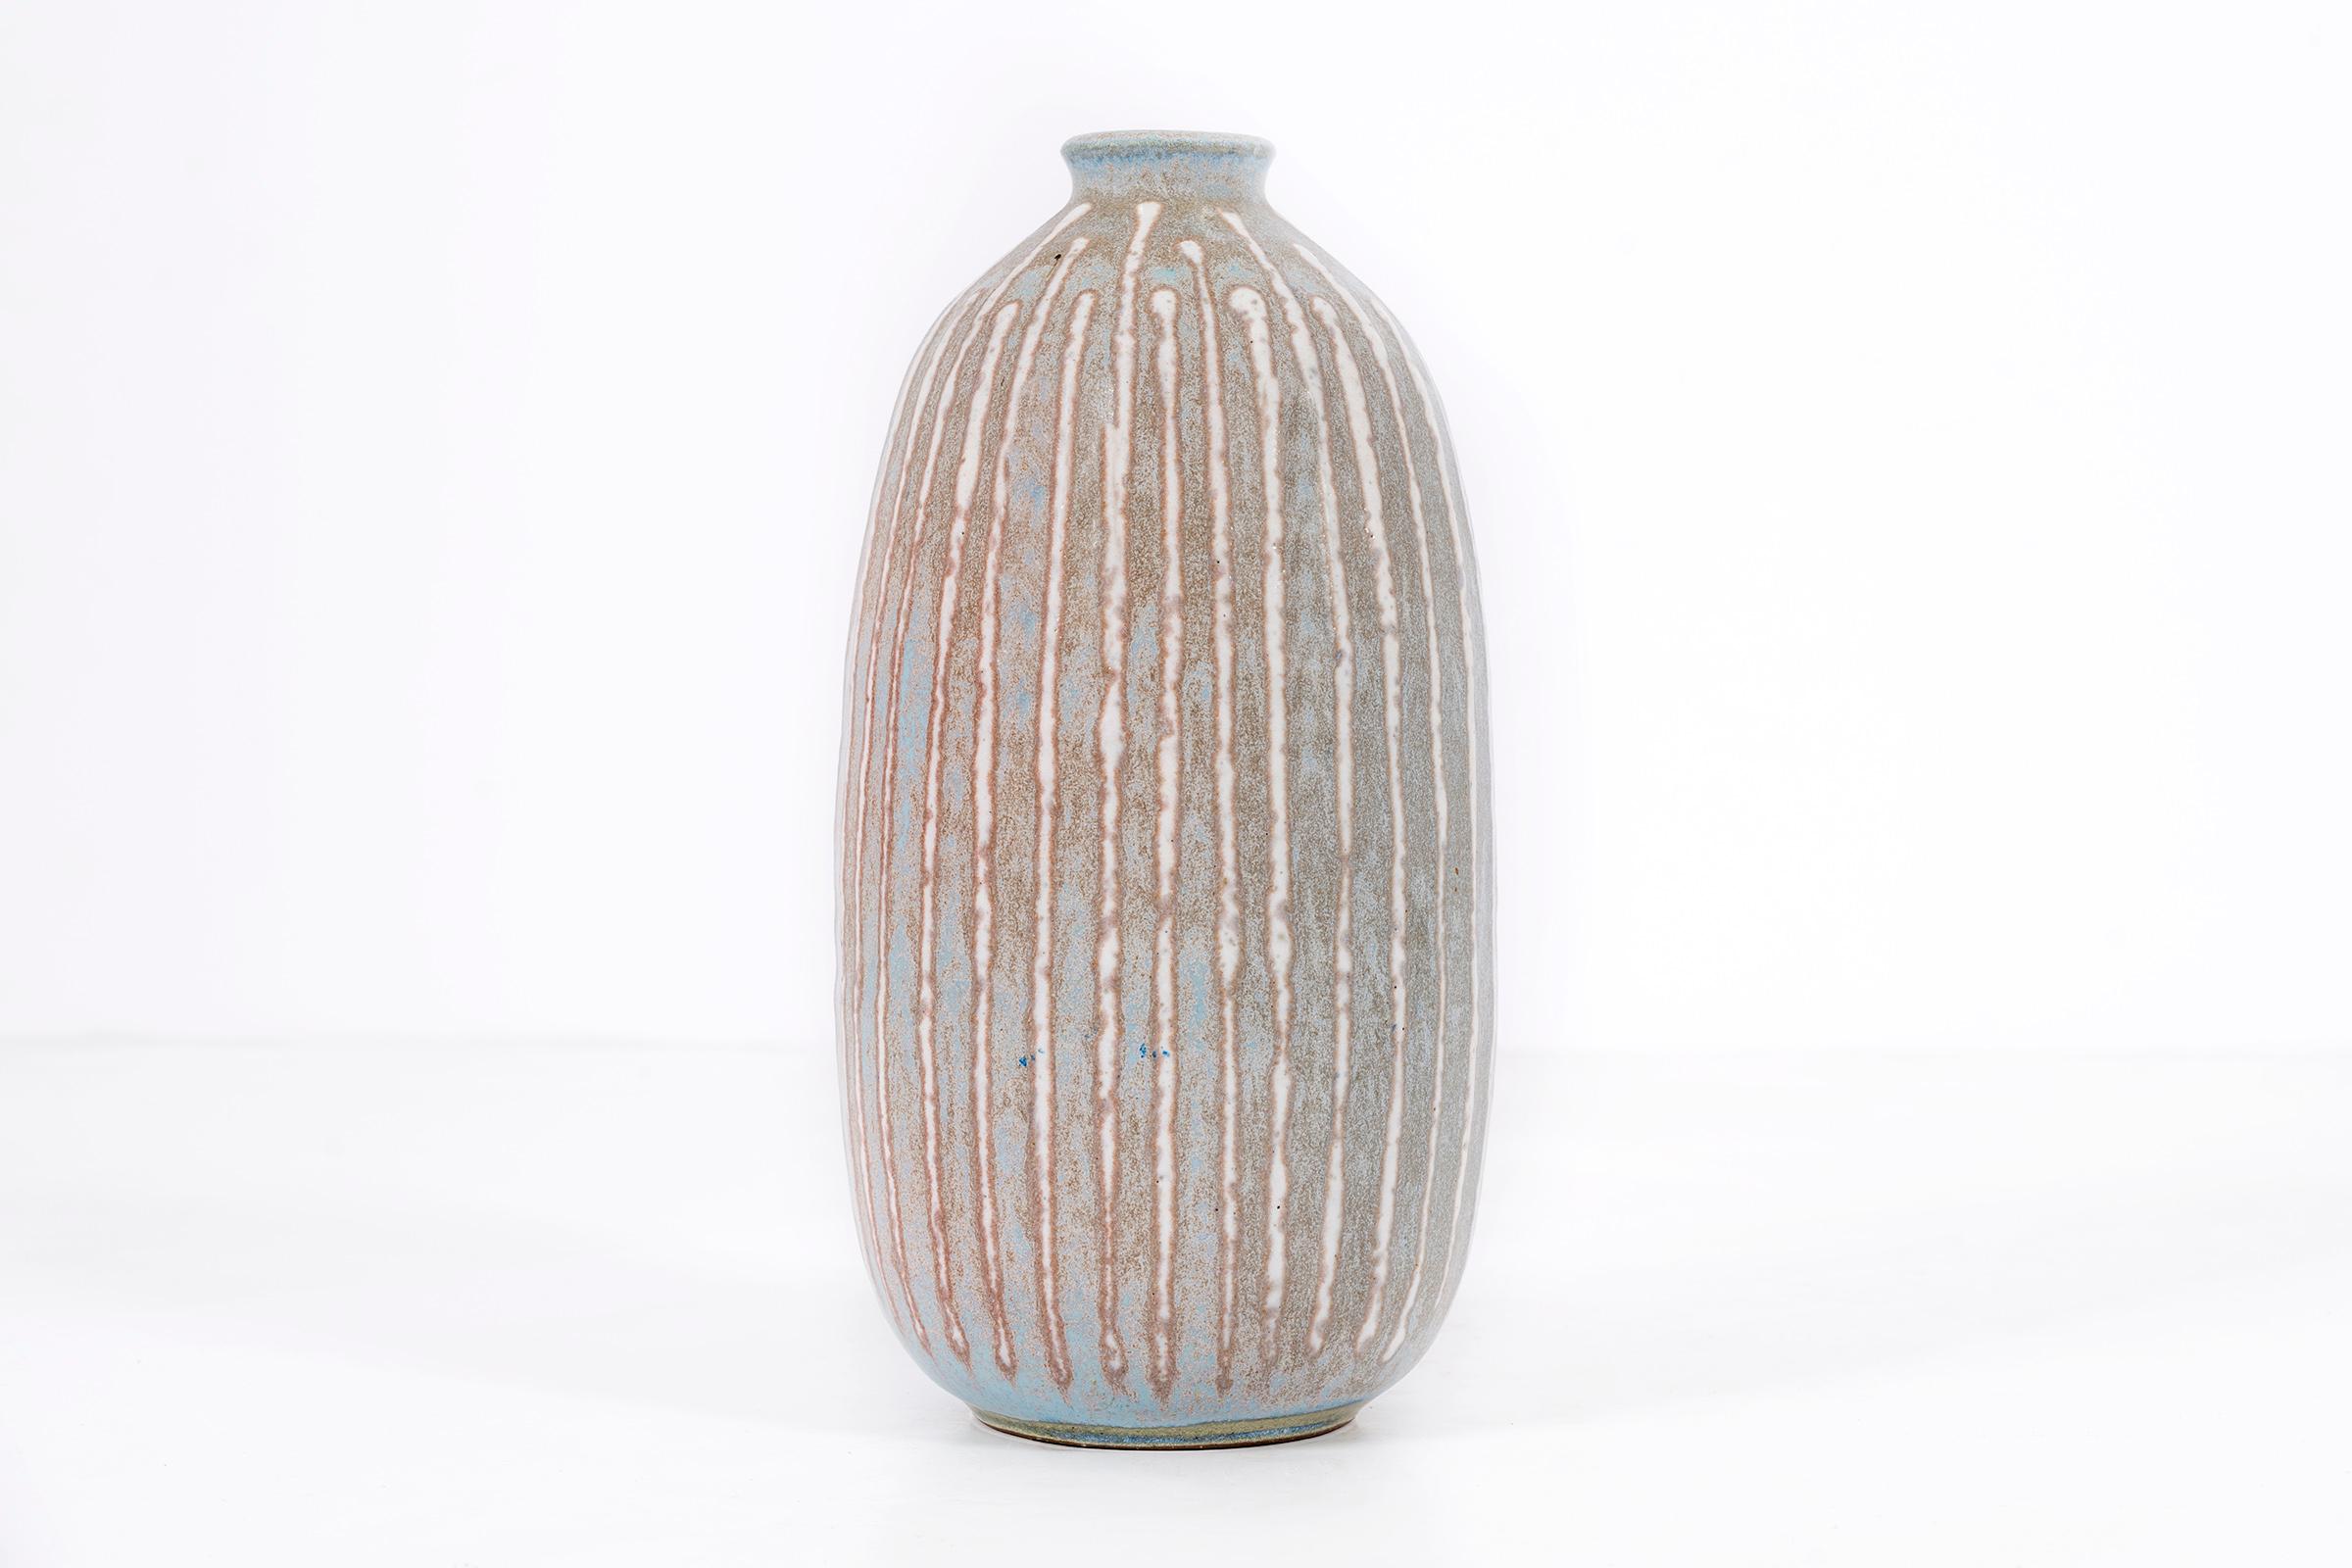 Clyde Burt ceramic vase in glazed stoneware with incised, abstract details.
Signed to underside: [CB].
American, circa 1965.